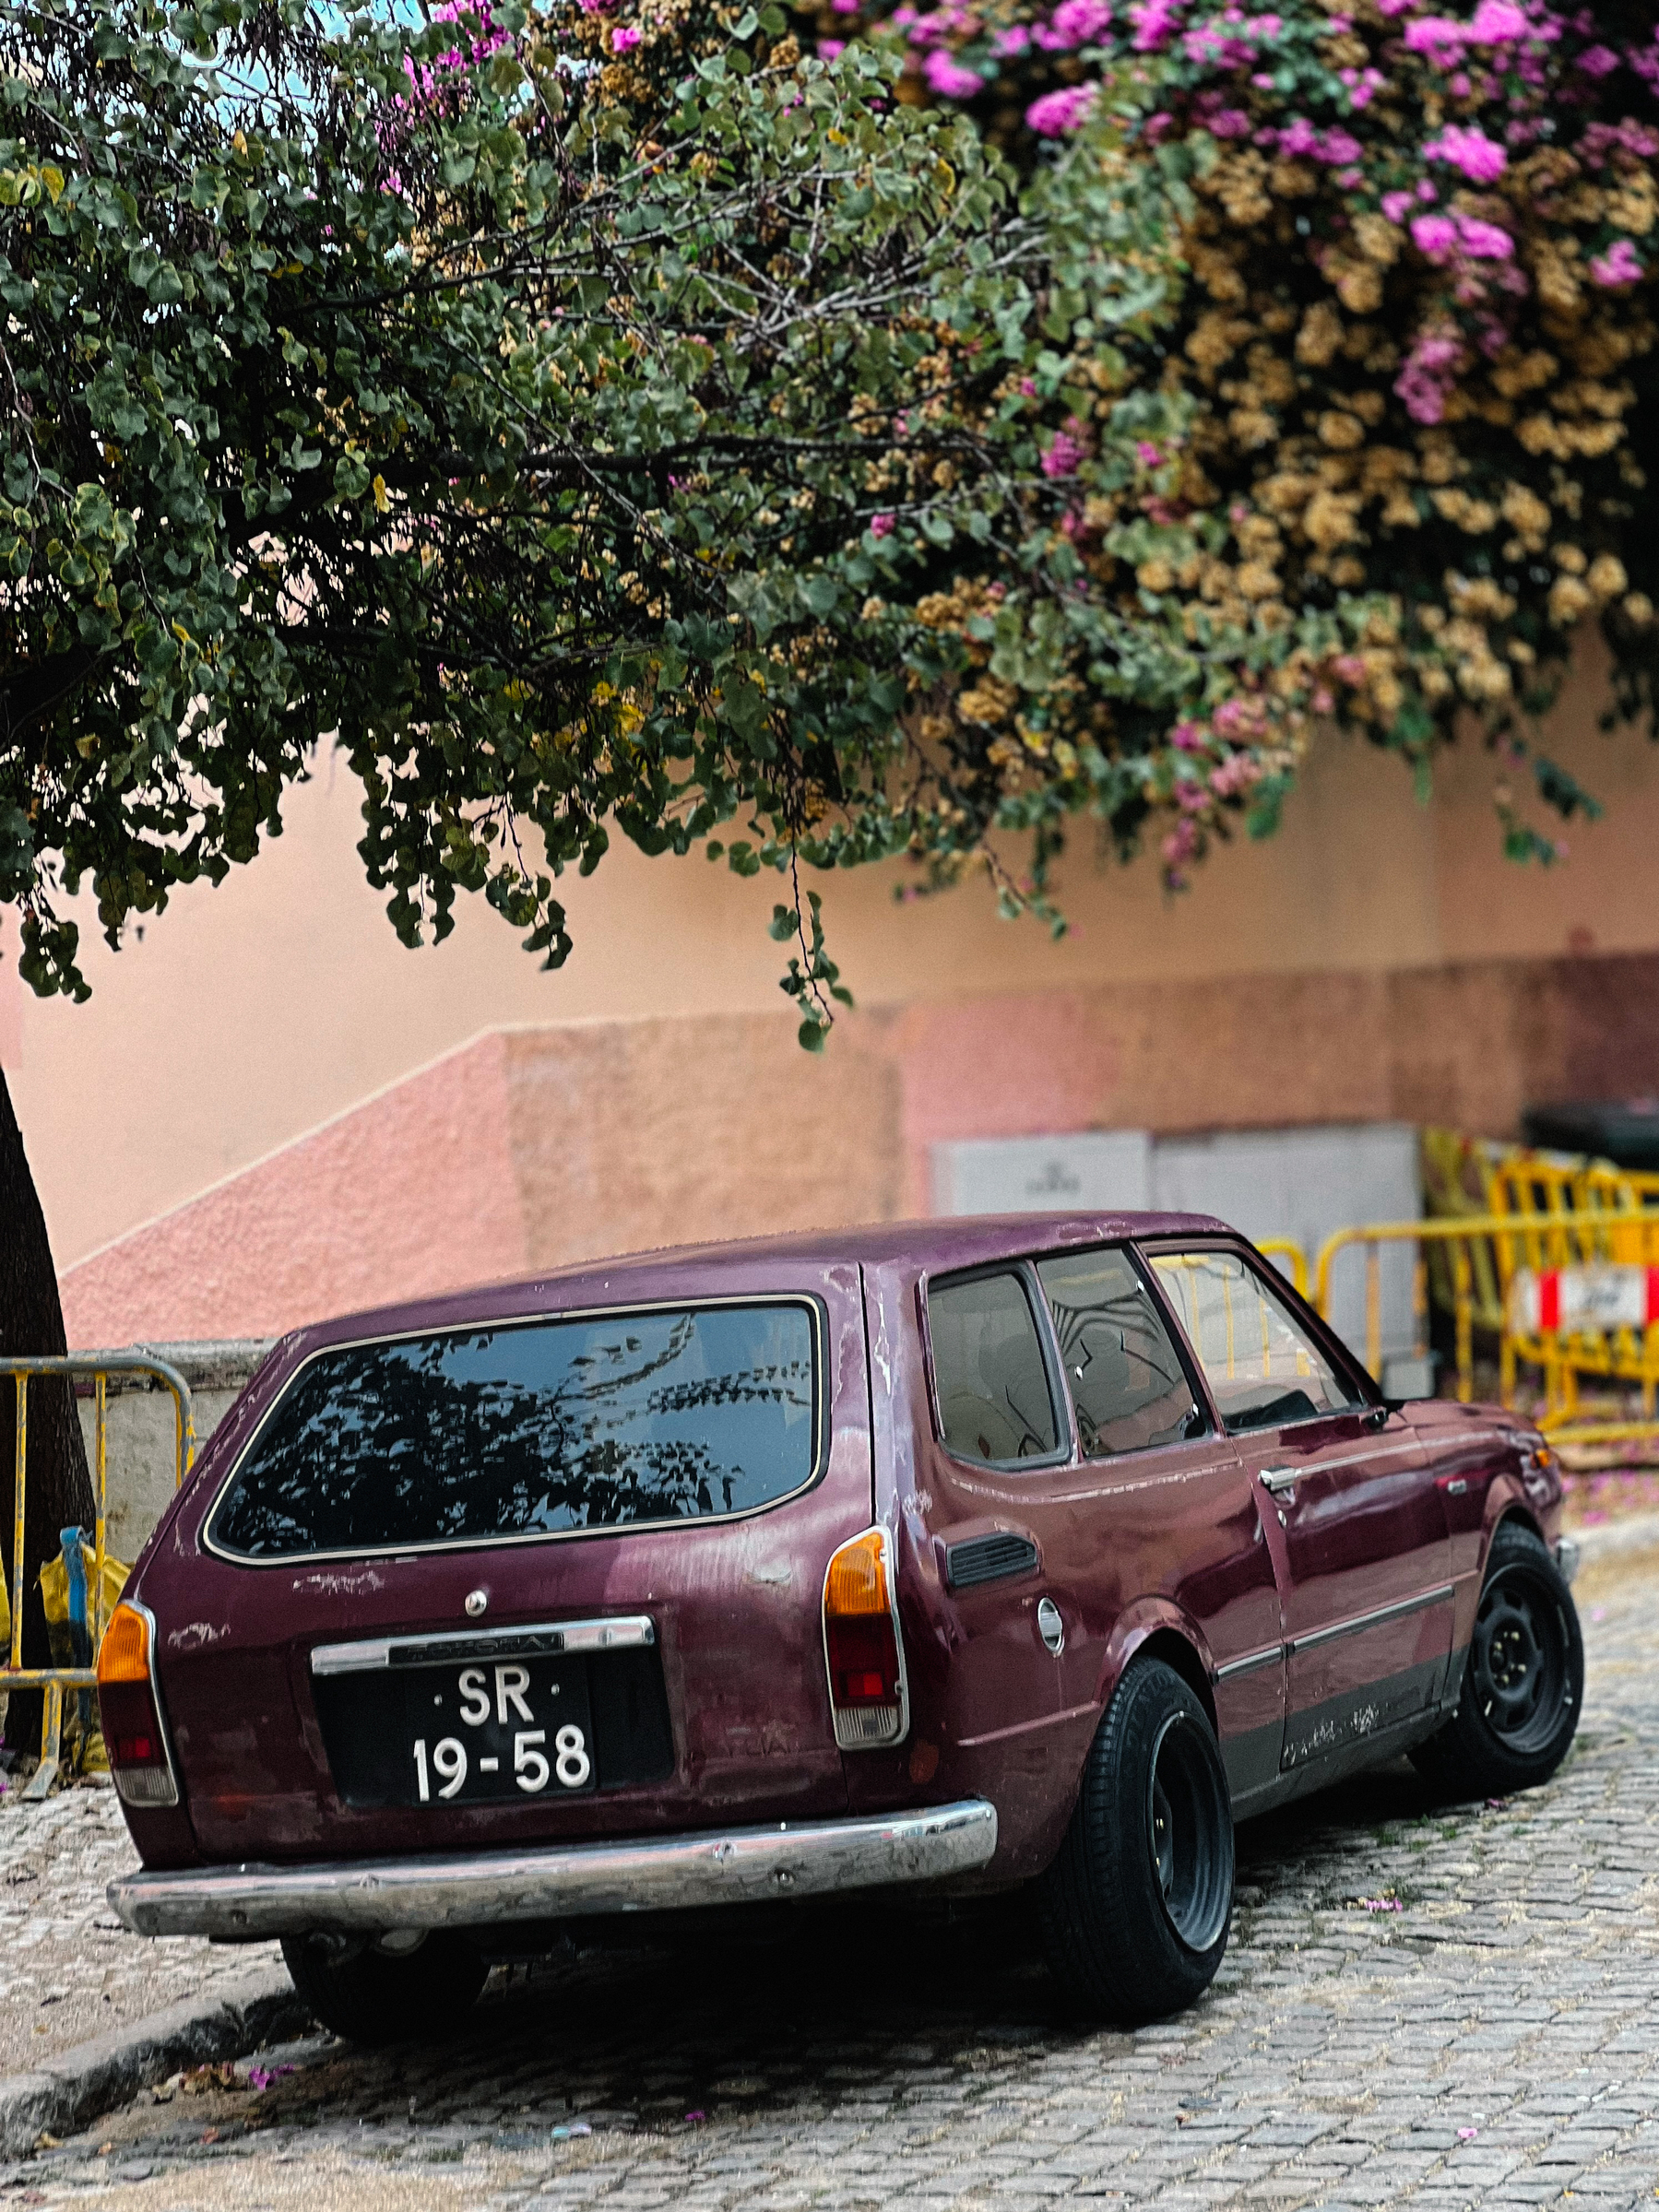 A dark purple car parked under a tree with purple flowers. 